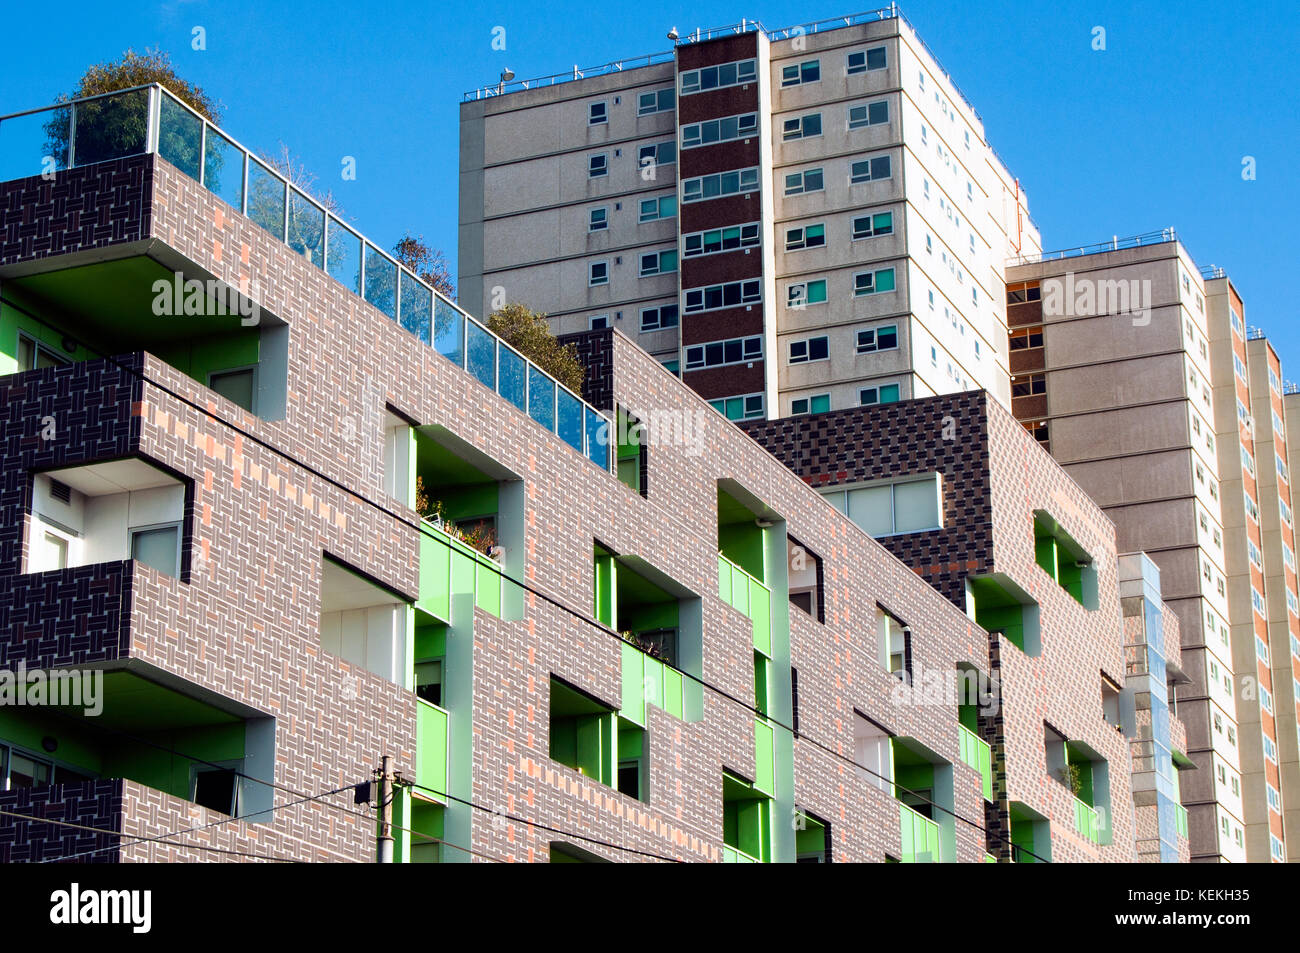 New apartment block and high rise 'housing commission' flats, Fitzroy, Victoria, Australia Stock Photo